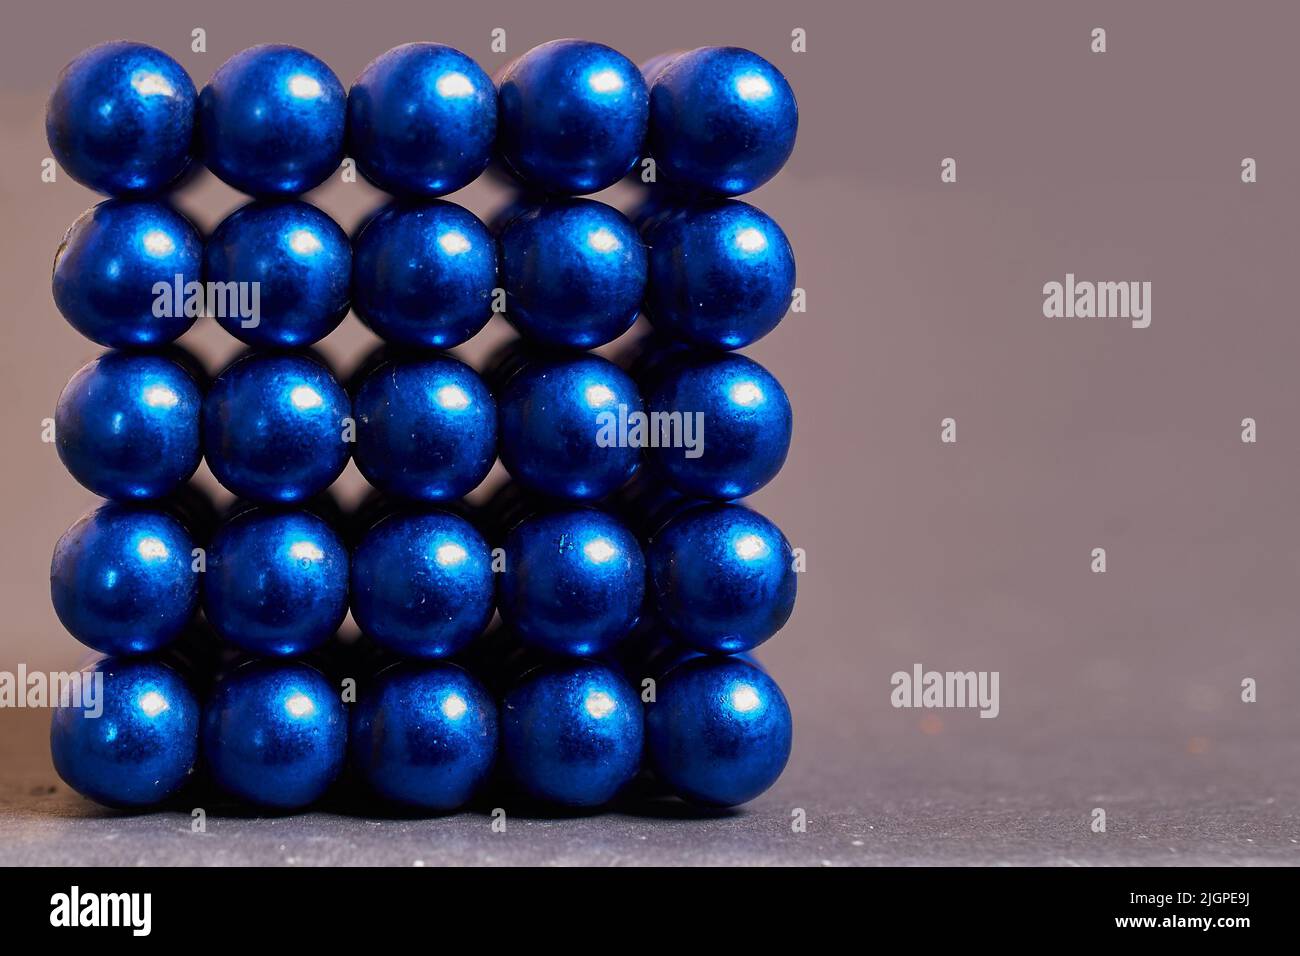 Magnetic cube made of blue metal balls on a colored background Stock Photo